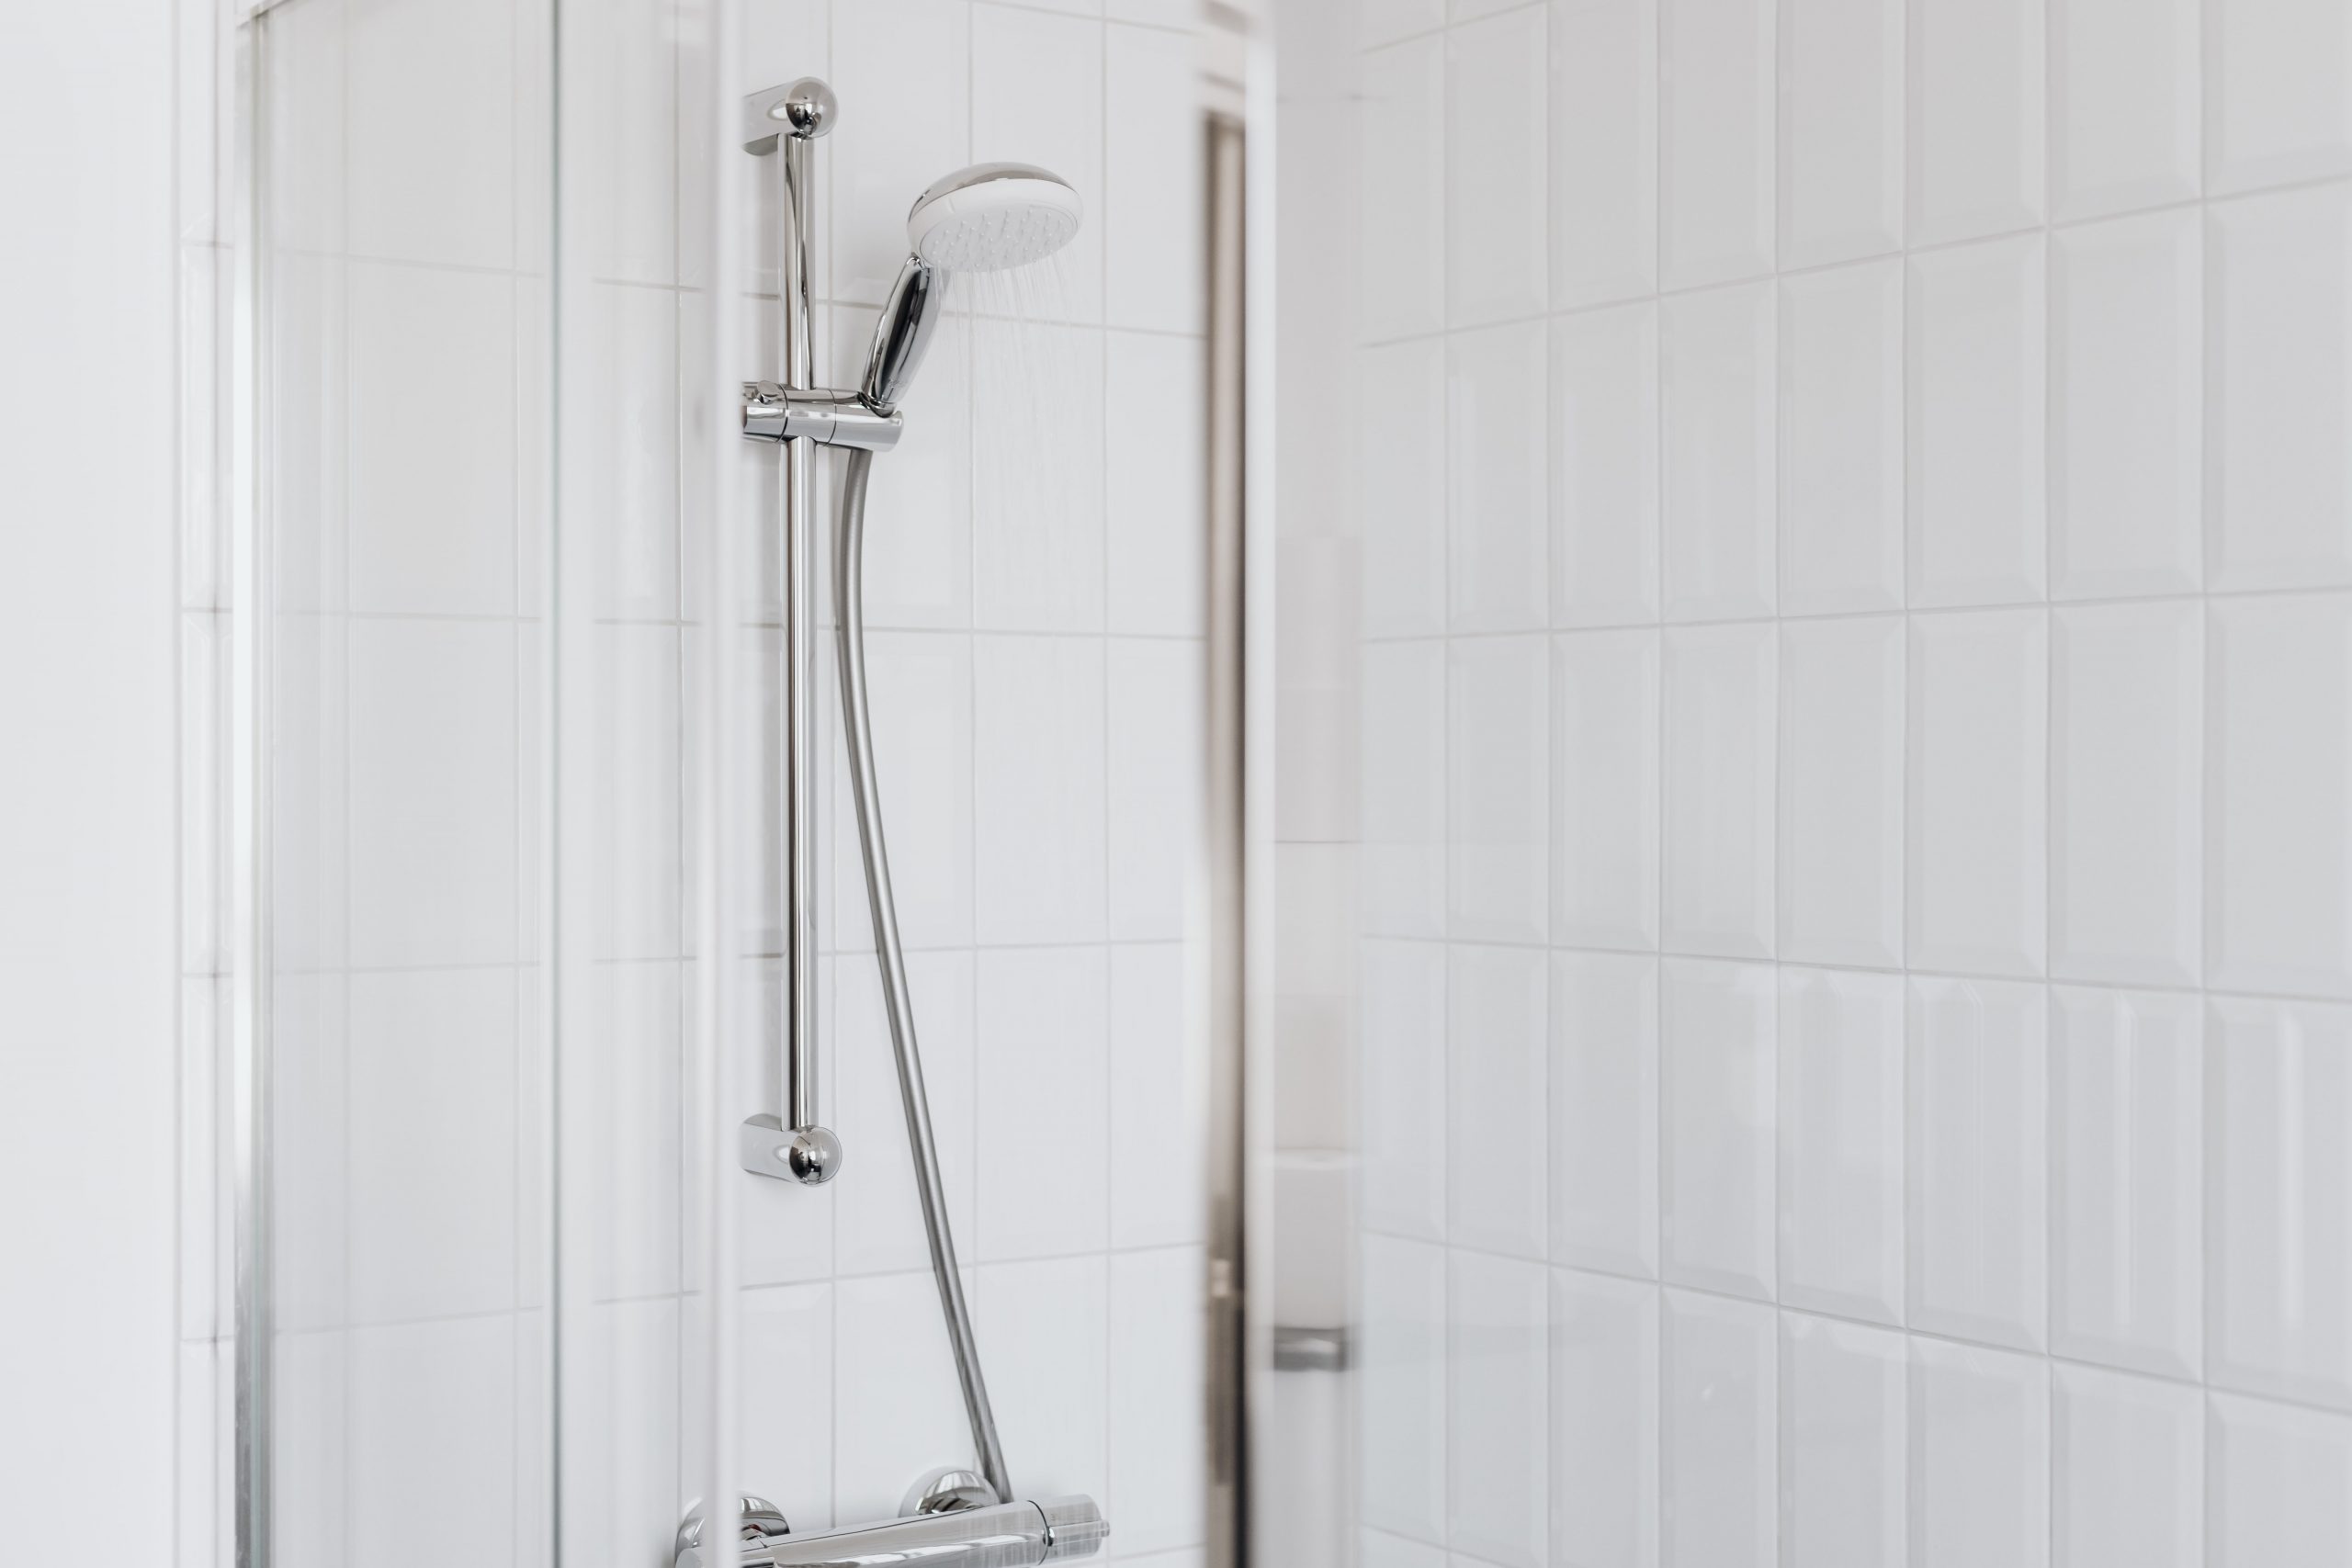 What should a shower be equipped with?